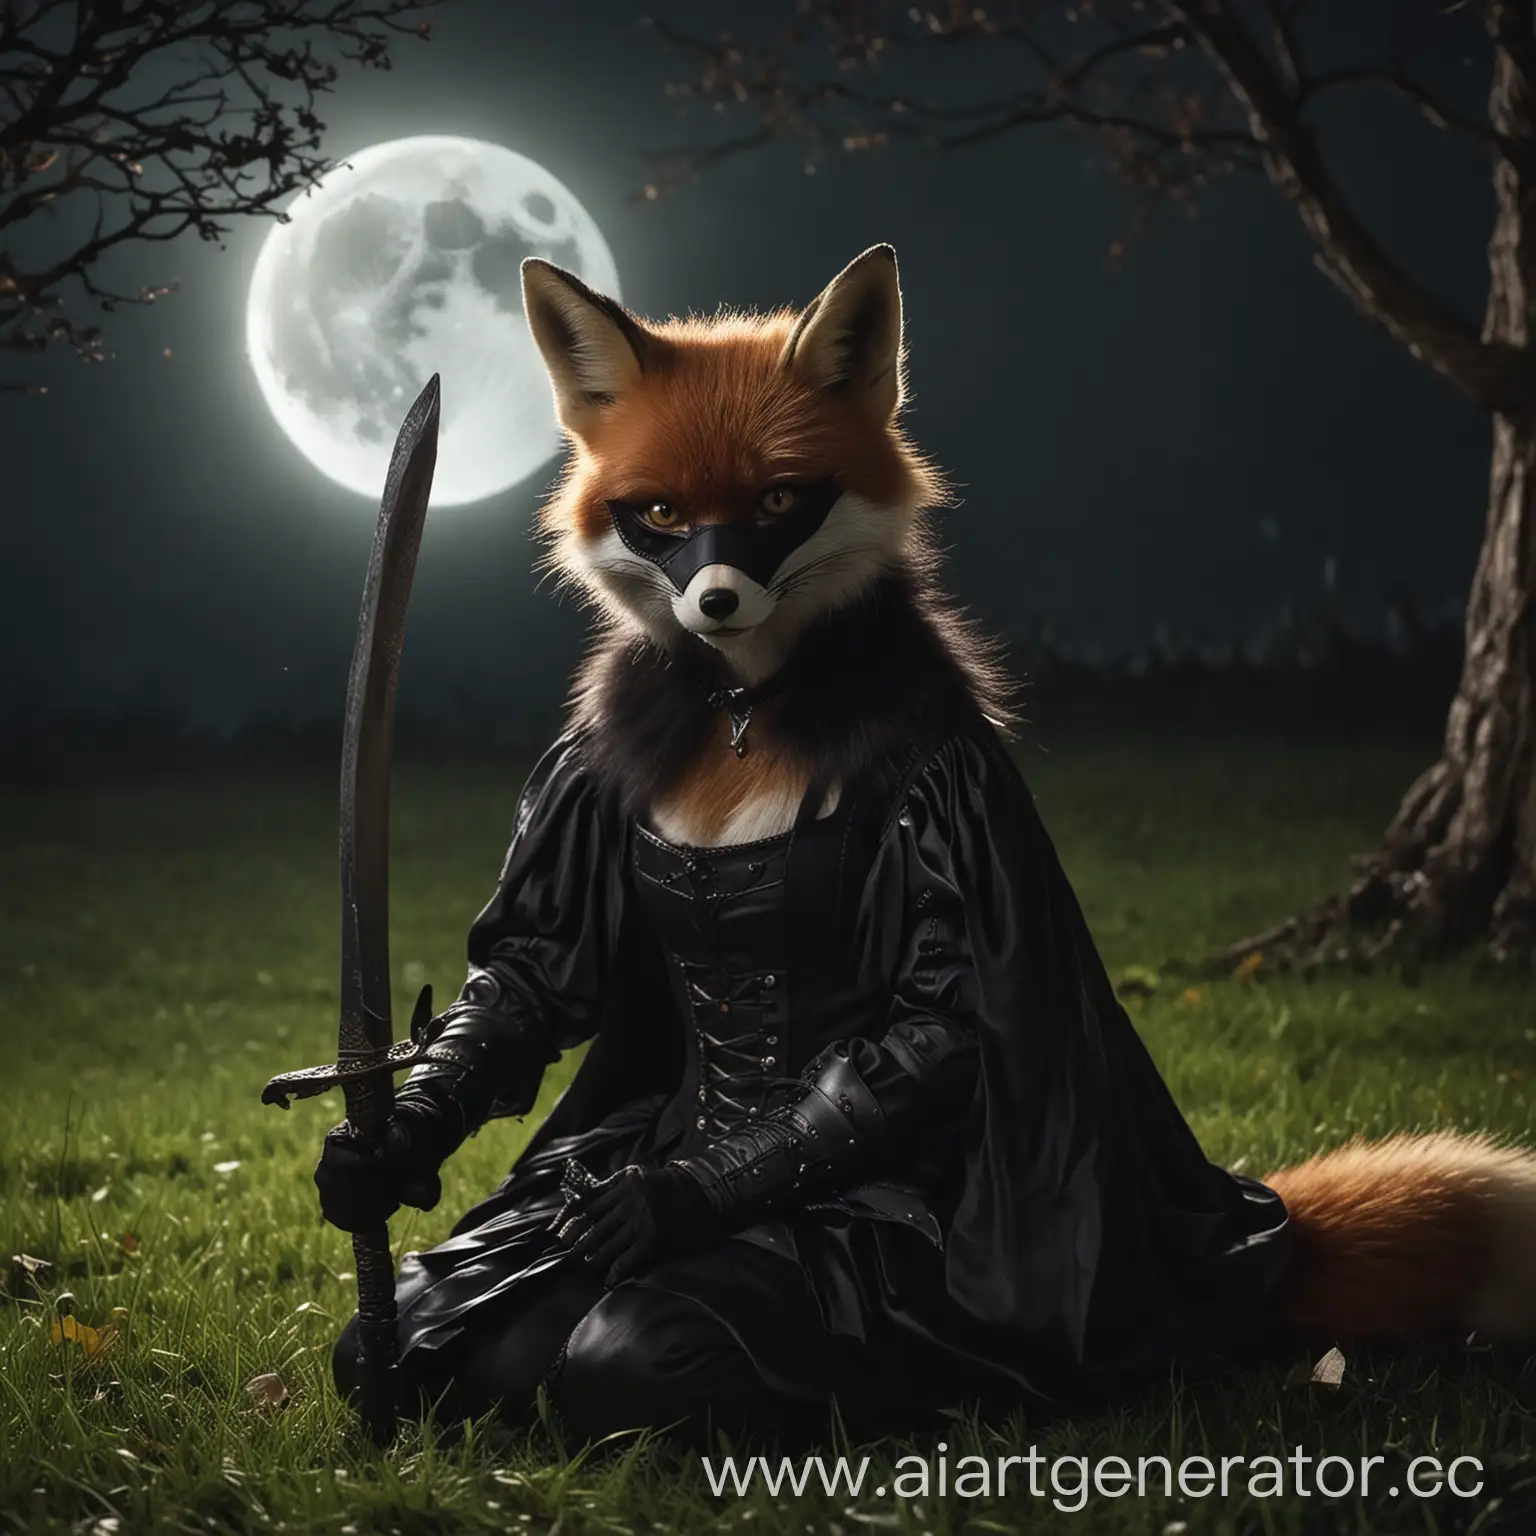 Sly-Fox-in-Mask-and-Capulet-Contemplating-Moonlit-Sword